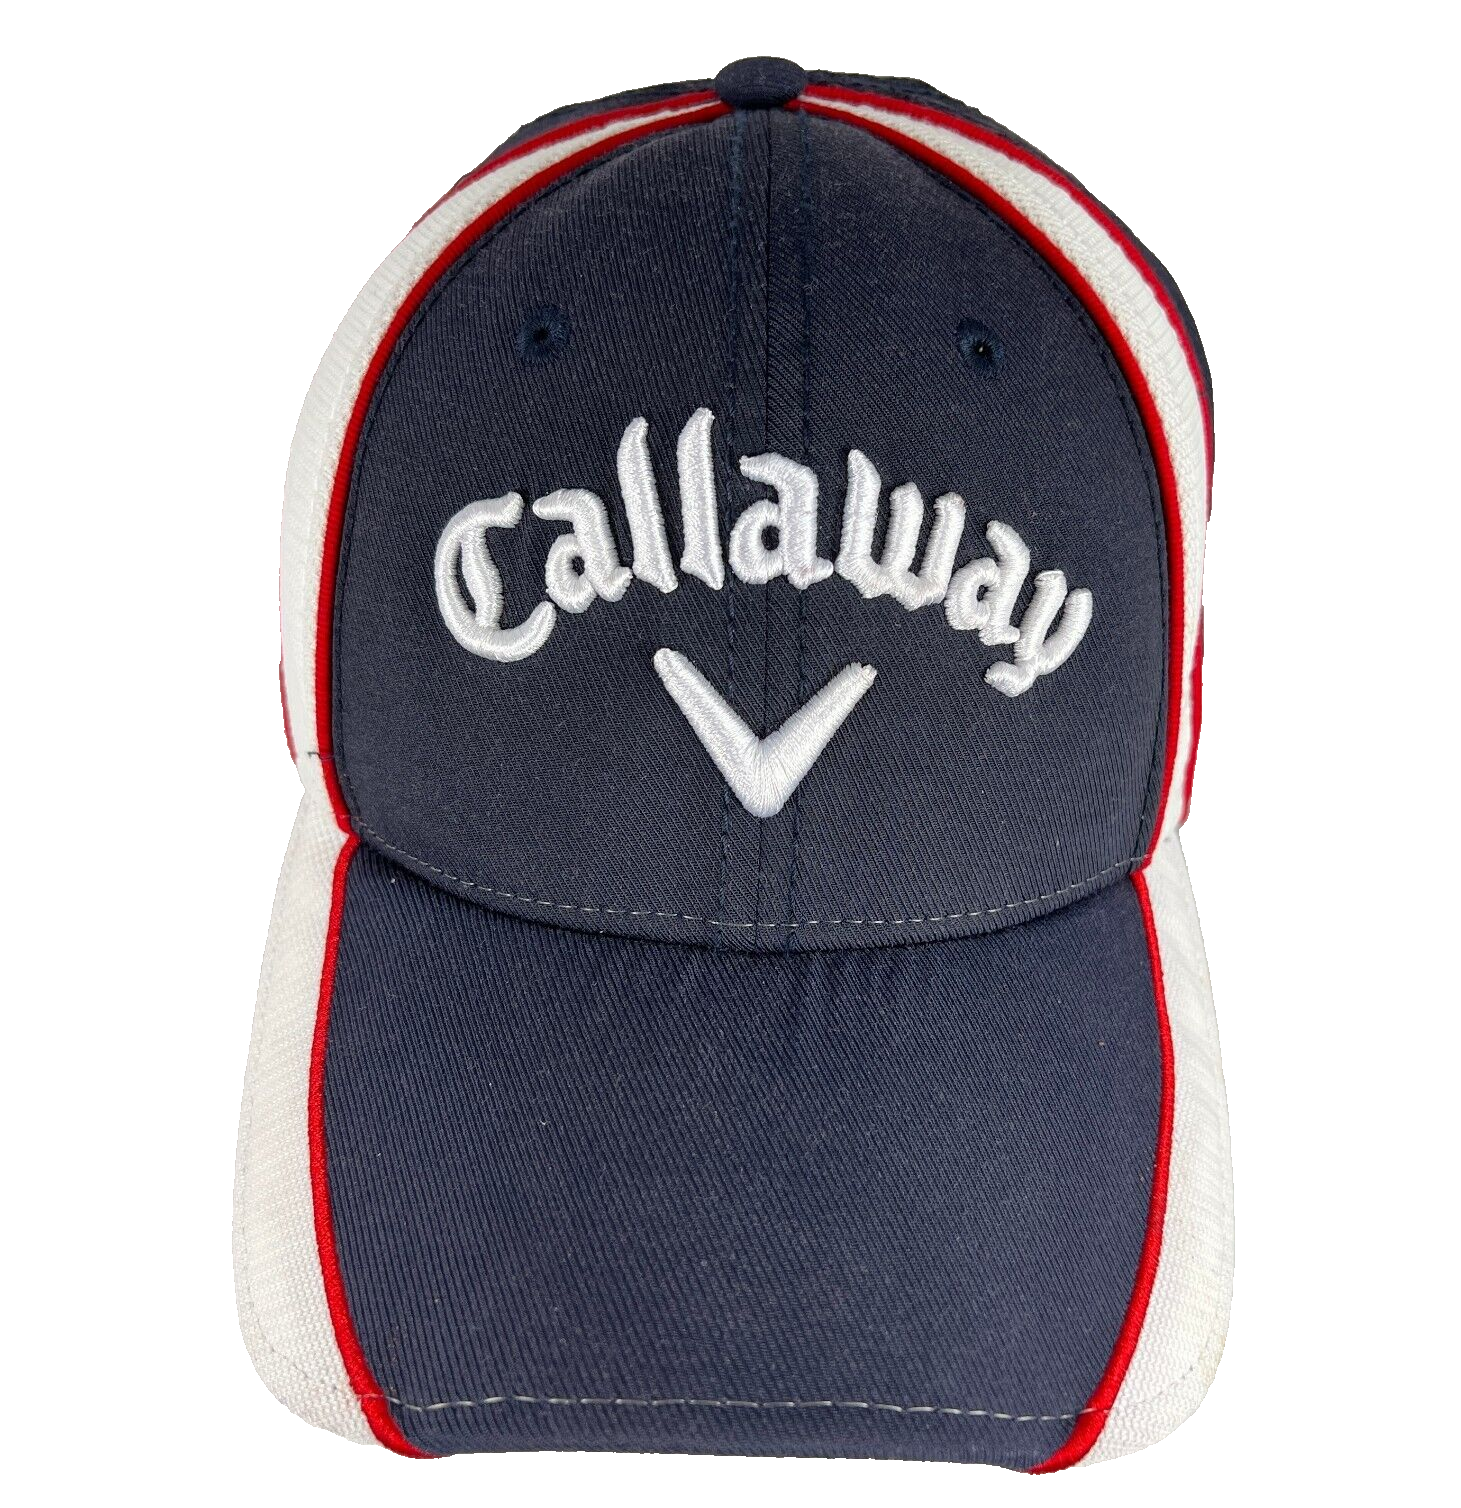 Primary image for Callaway  Golf Baseball Hat Cap Putters Blue Adjustable White Hot New Era